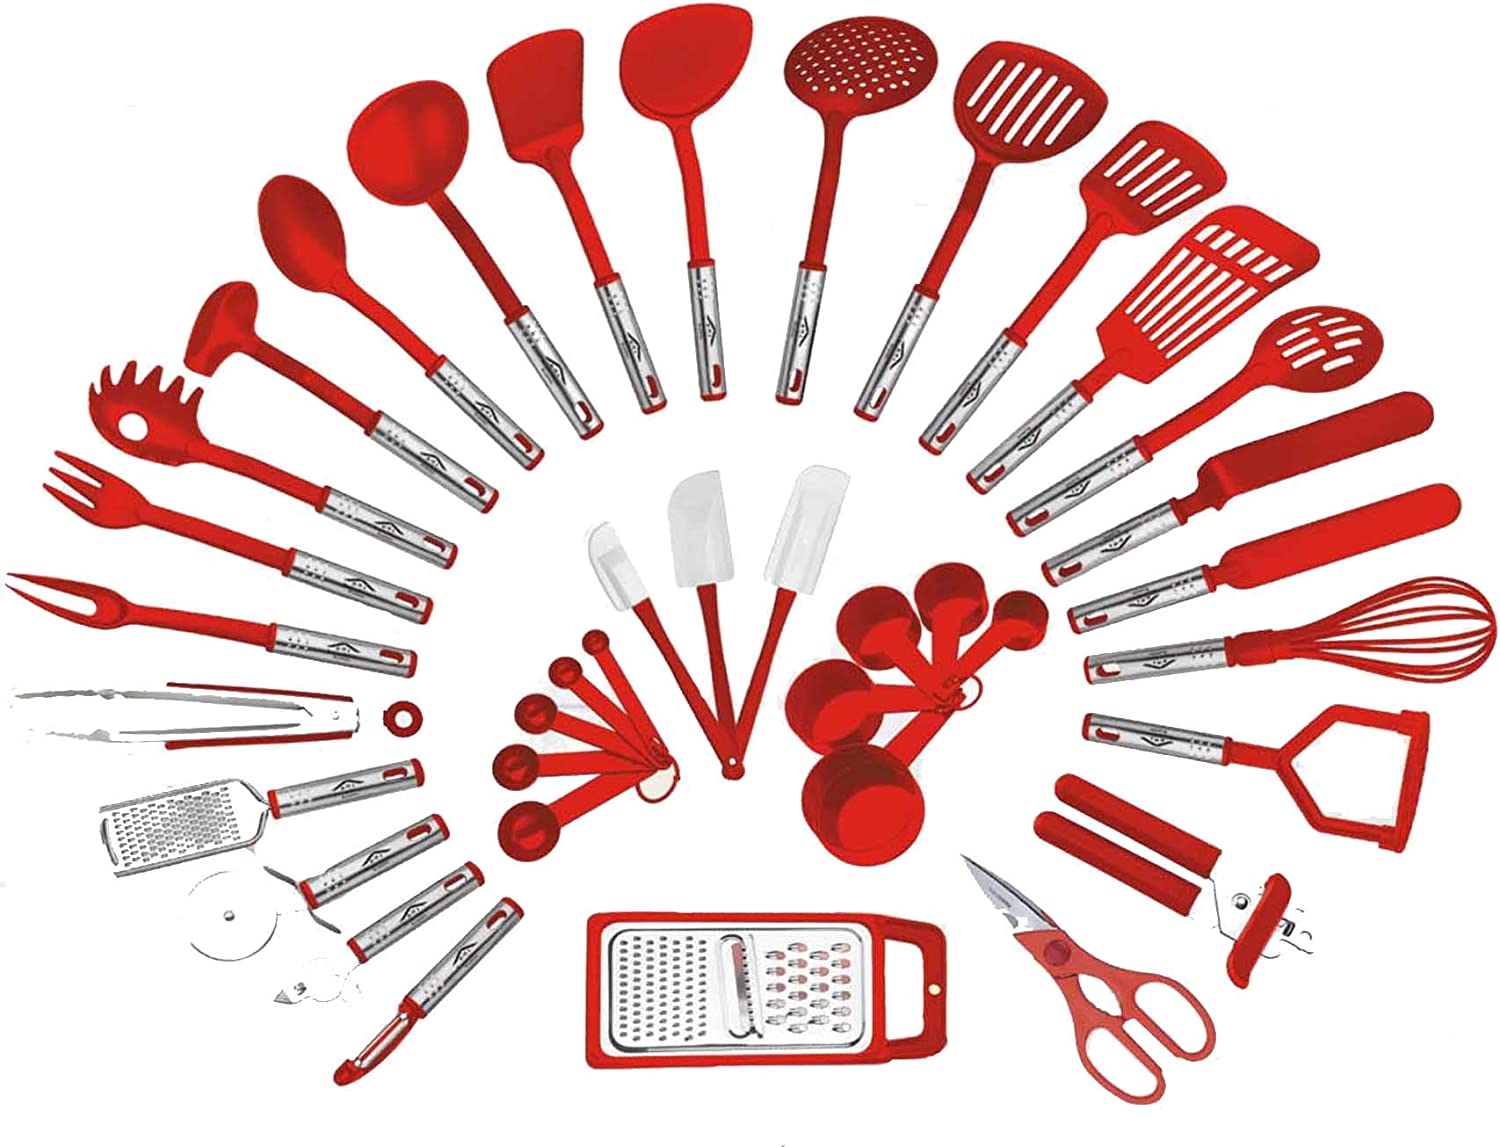 38-piece Kitchen Utensils Set Home Cooking Tools Gadgets Turners Tongs Spatulas Pizza Cutter Whisk Bottle Opener, Graters Peeler, Can Opener, Measuring Cups Spoons (Red)